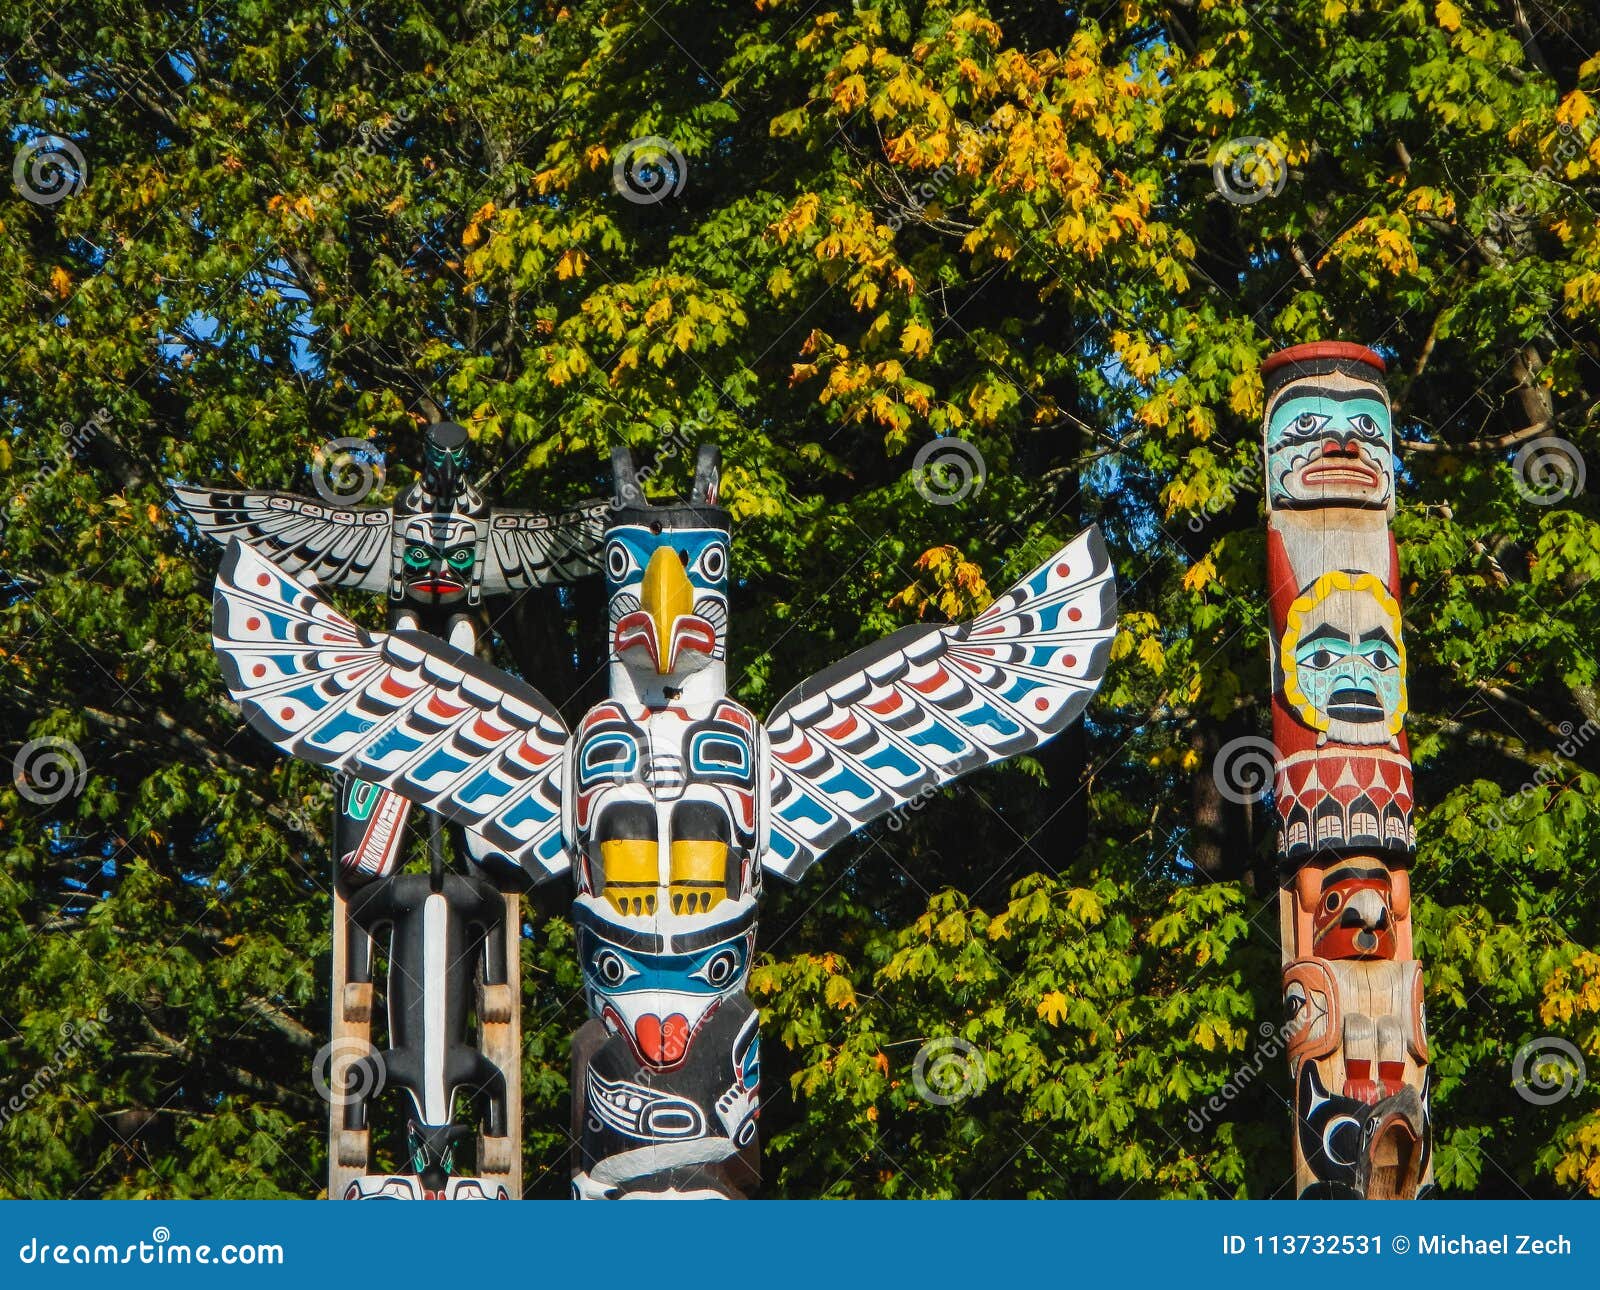 colorful totems in stanley park vancouver canada